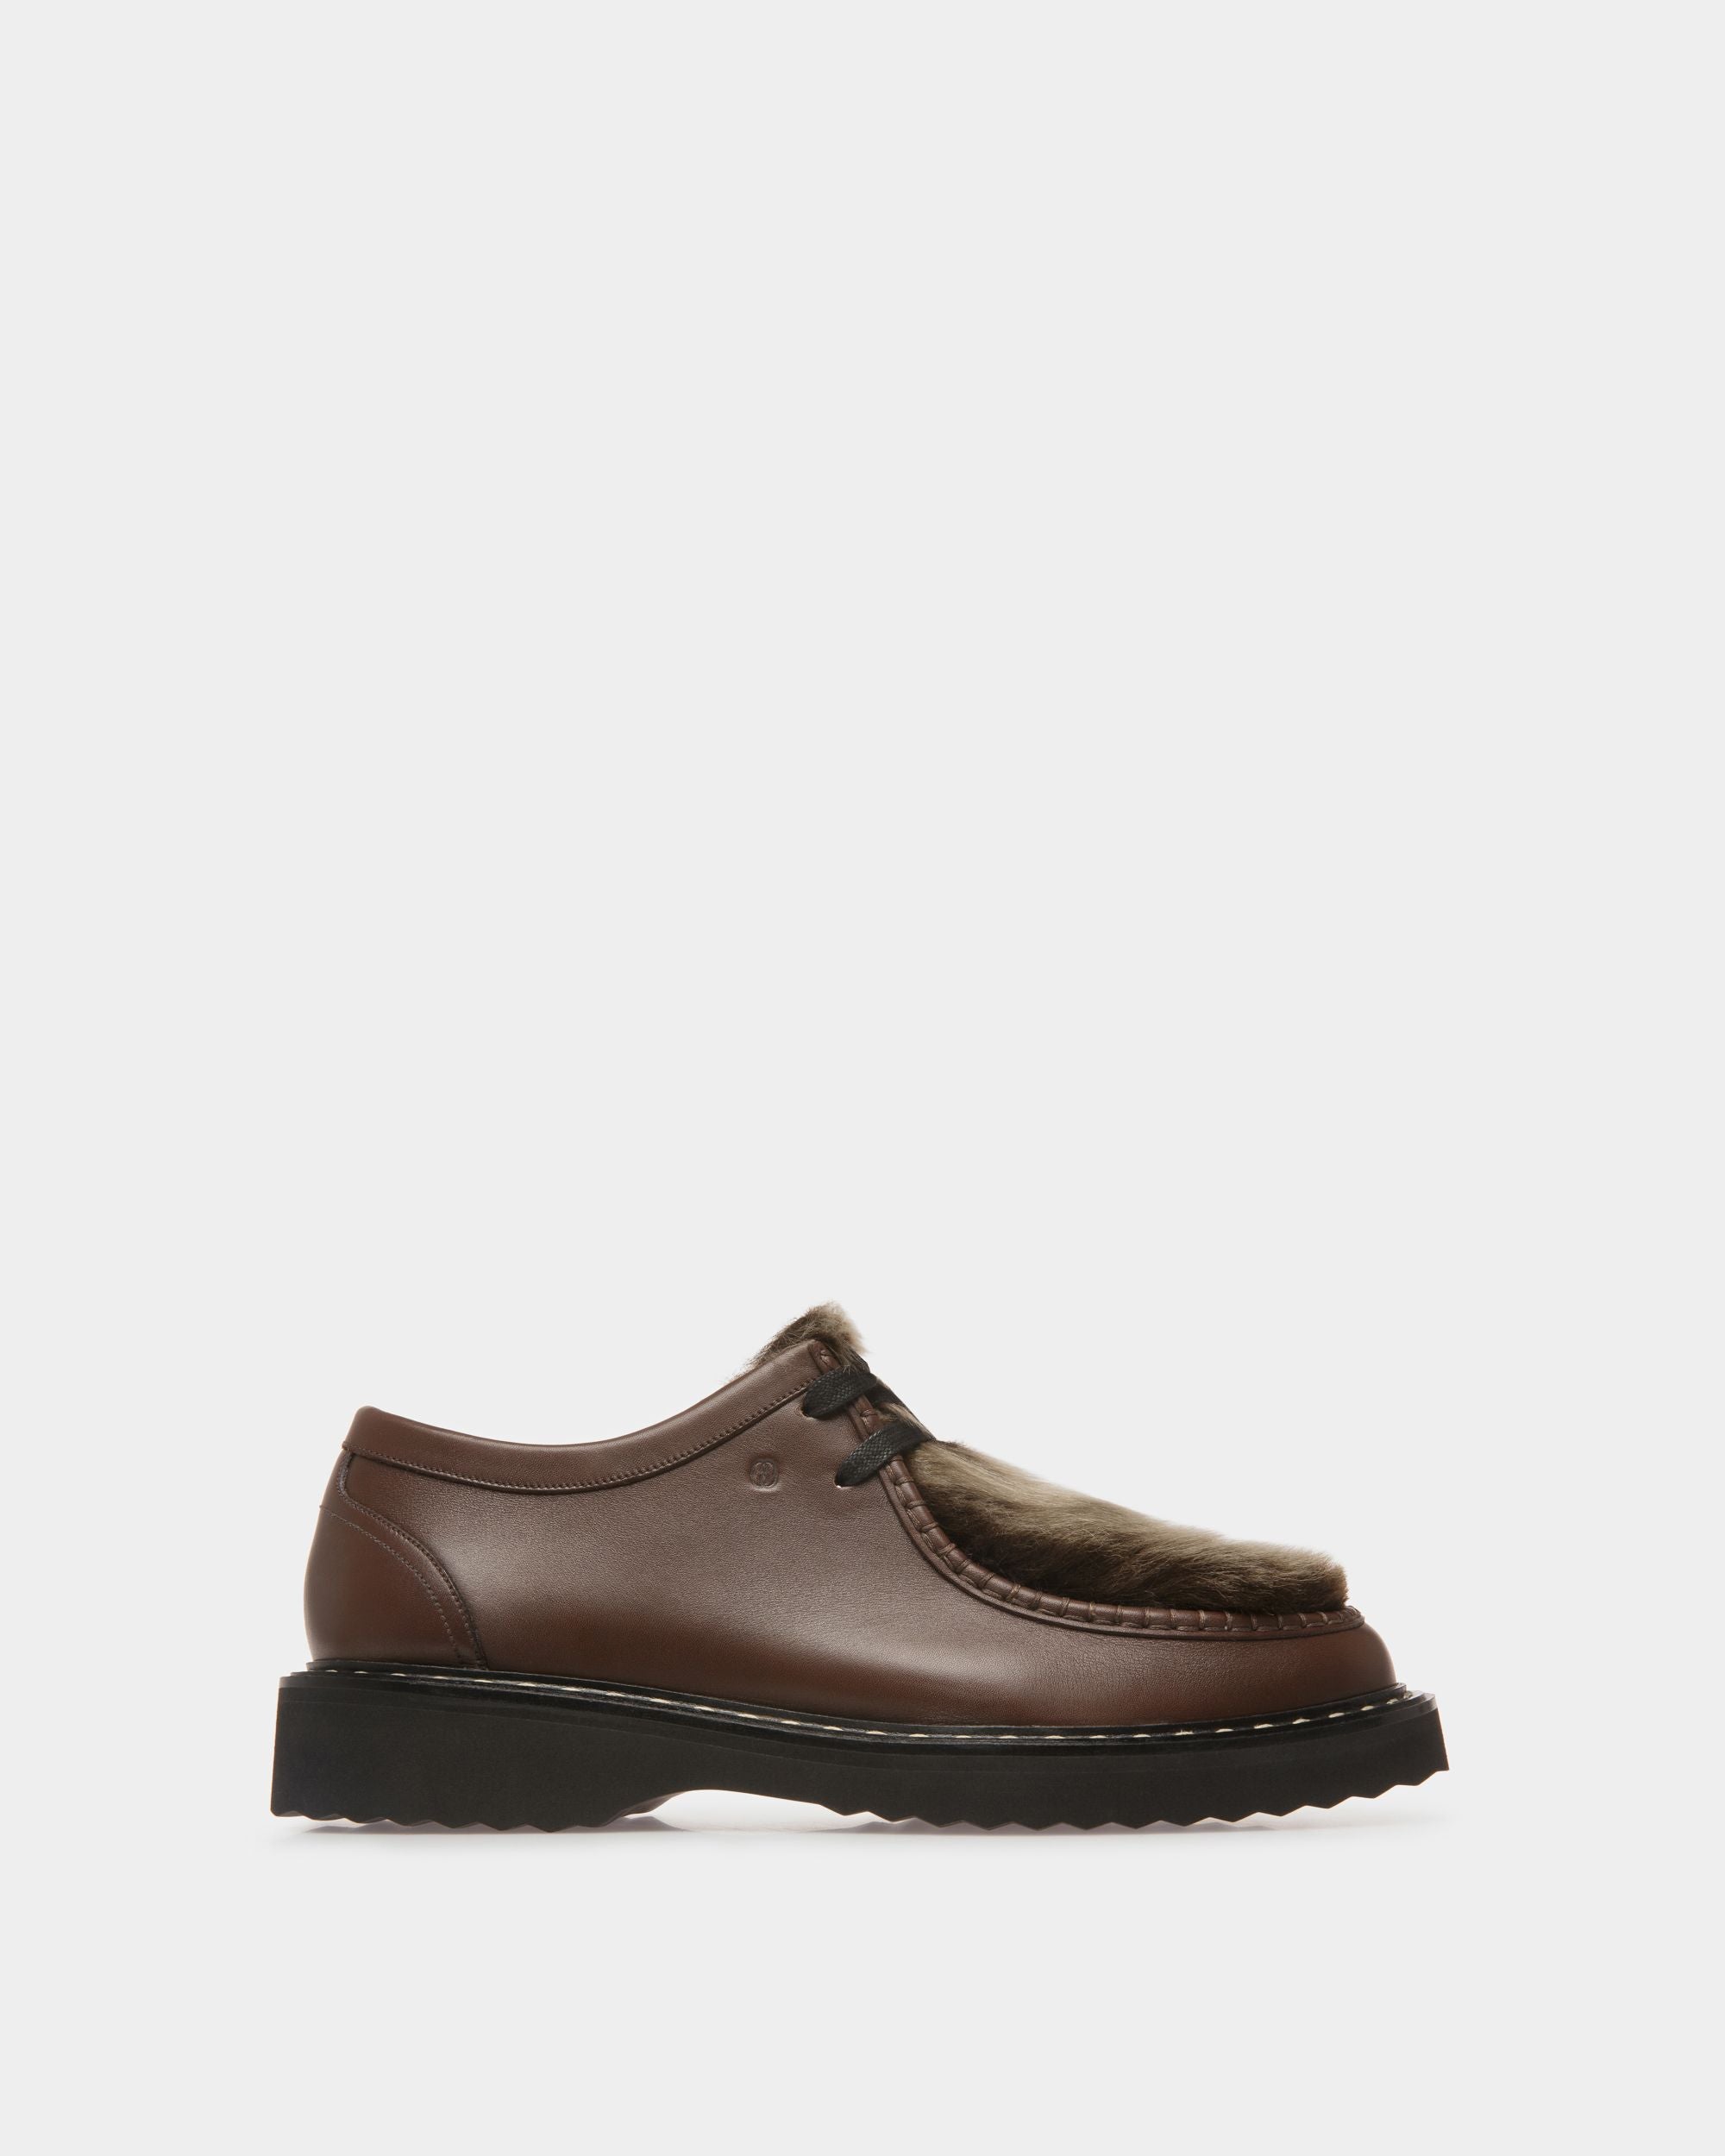 Nadhy | Men's Lace-ups | Brown Leather | Bally | Still Life Side